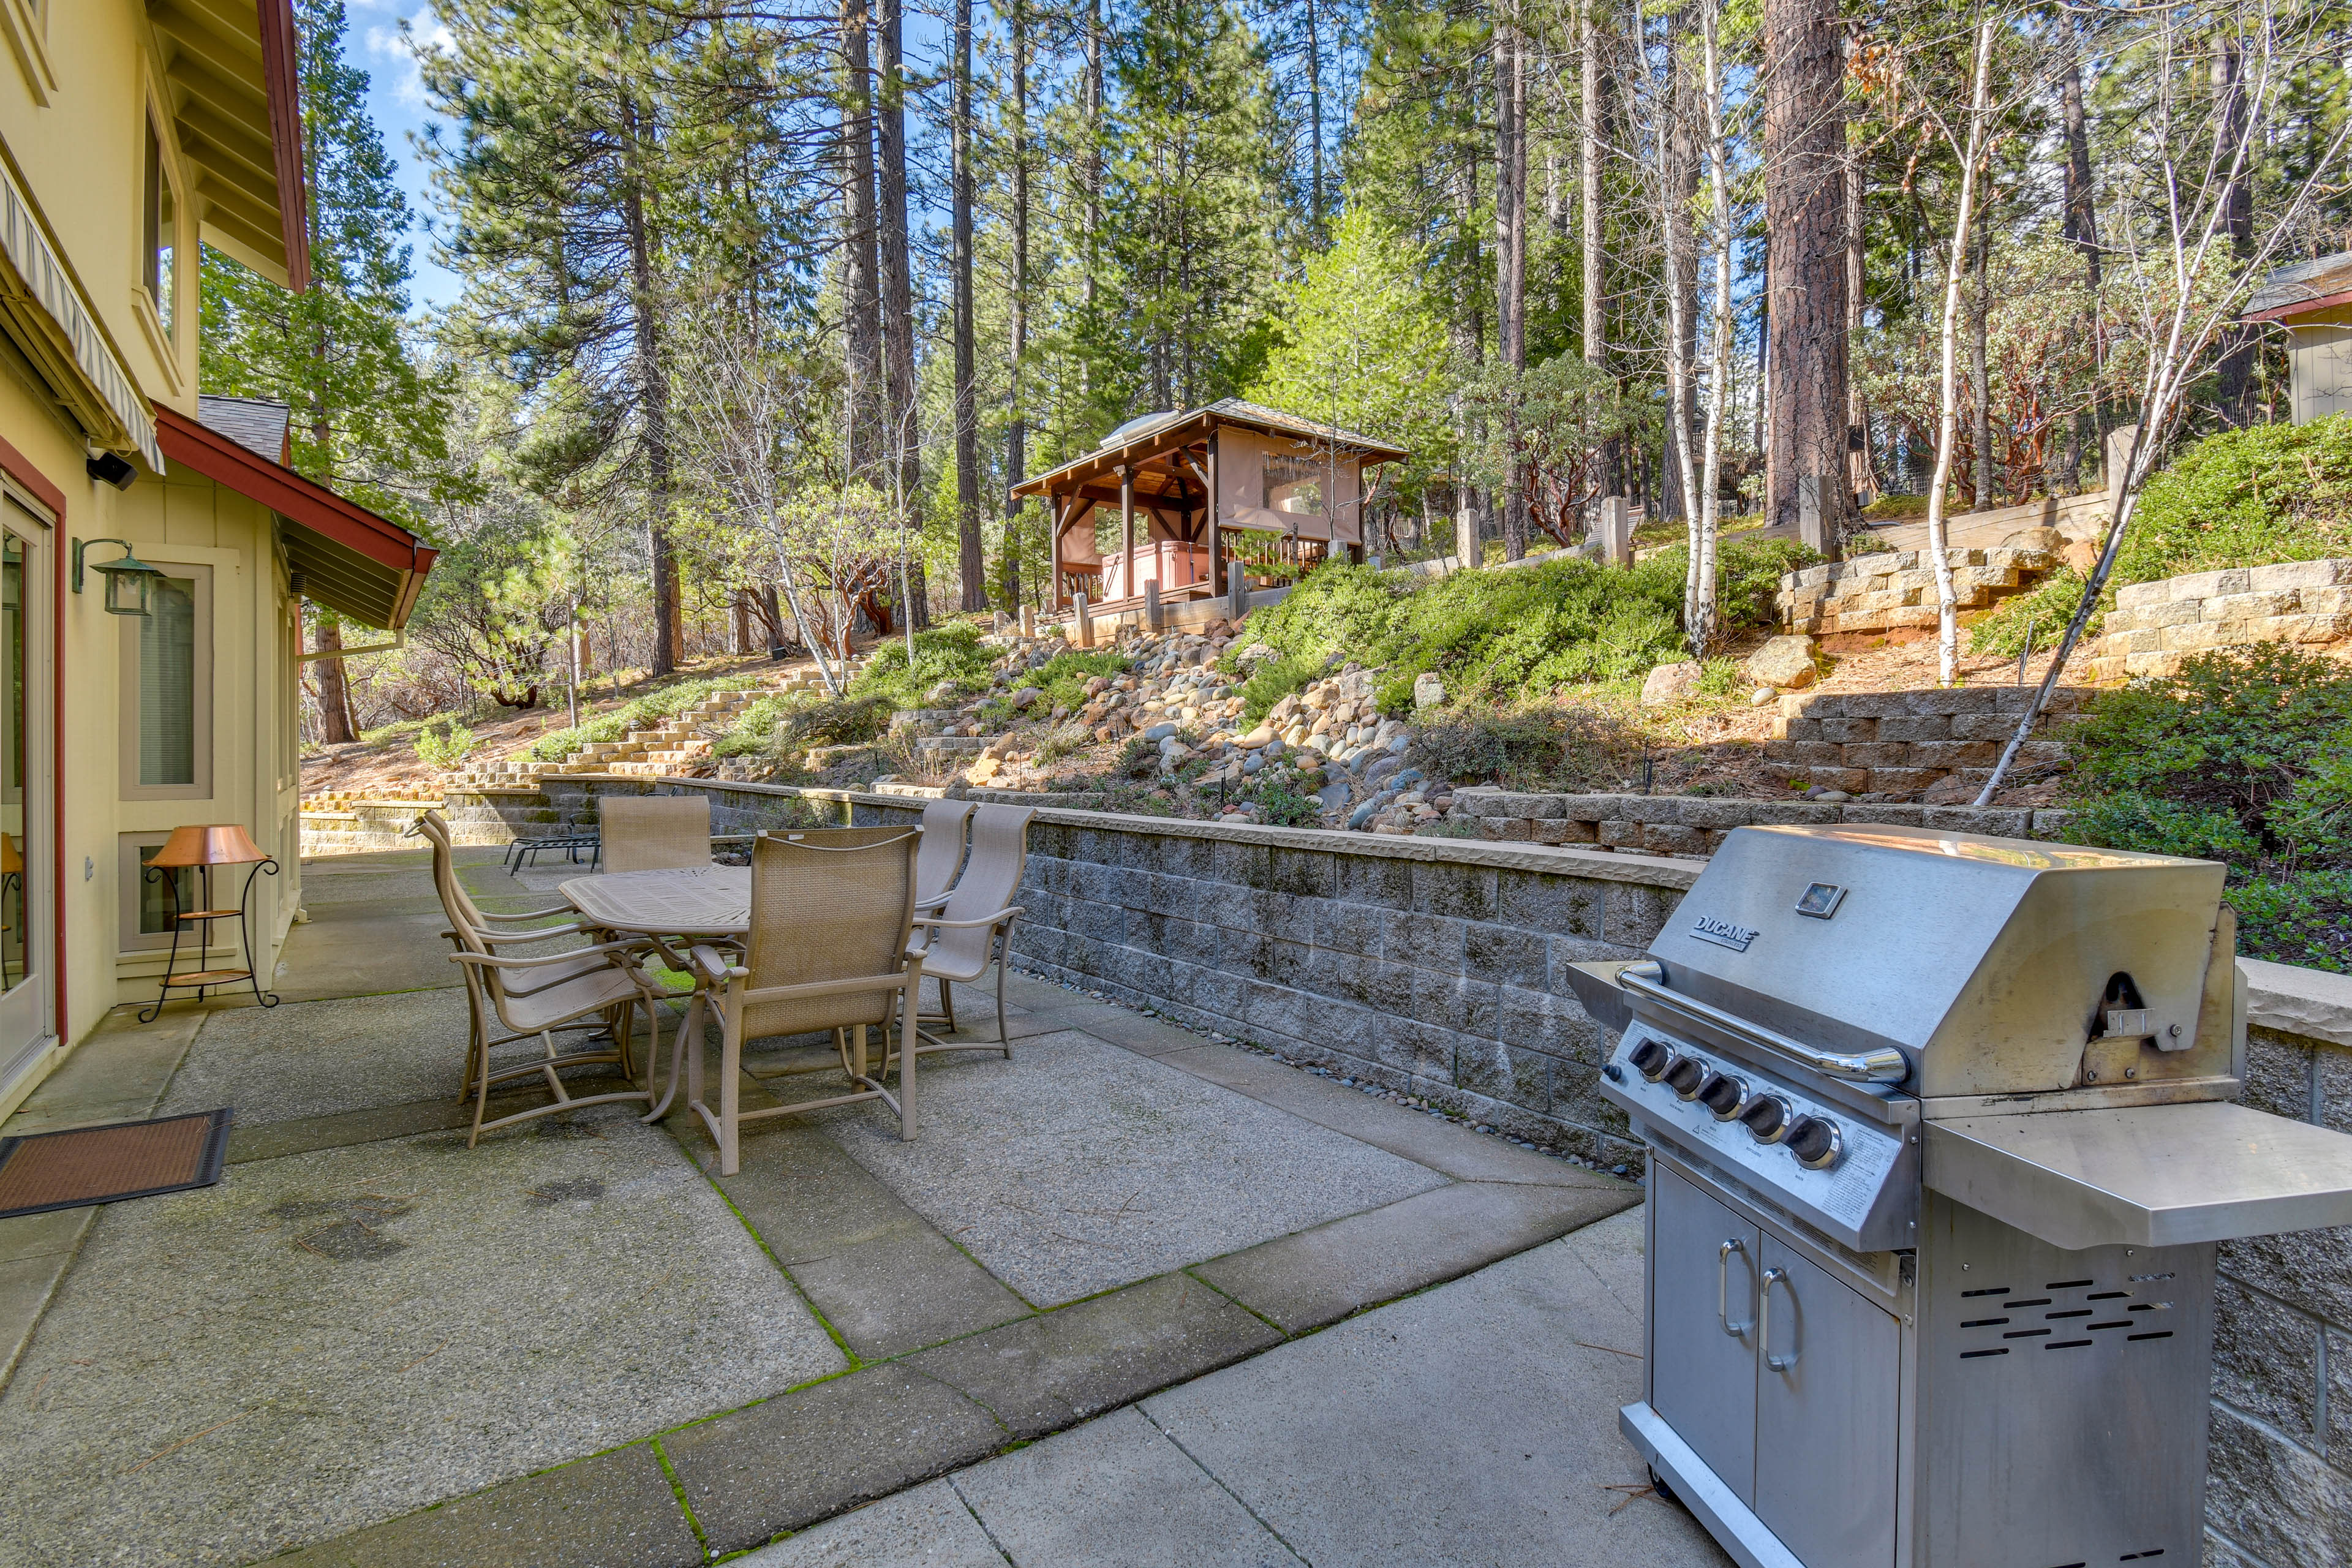 Private Patio | Gas Grill | Outdoor Dining Area